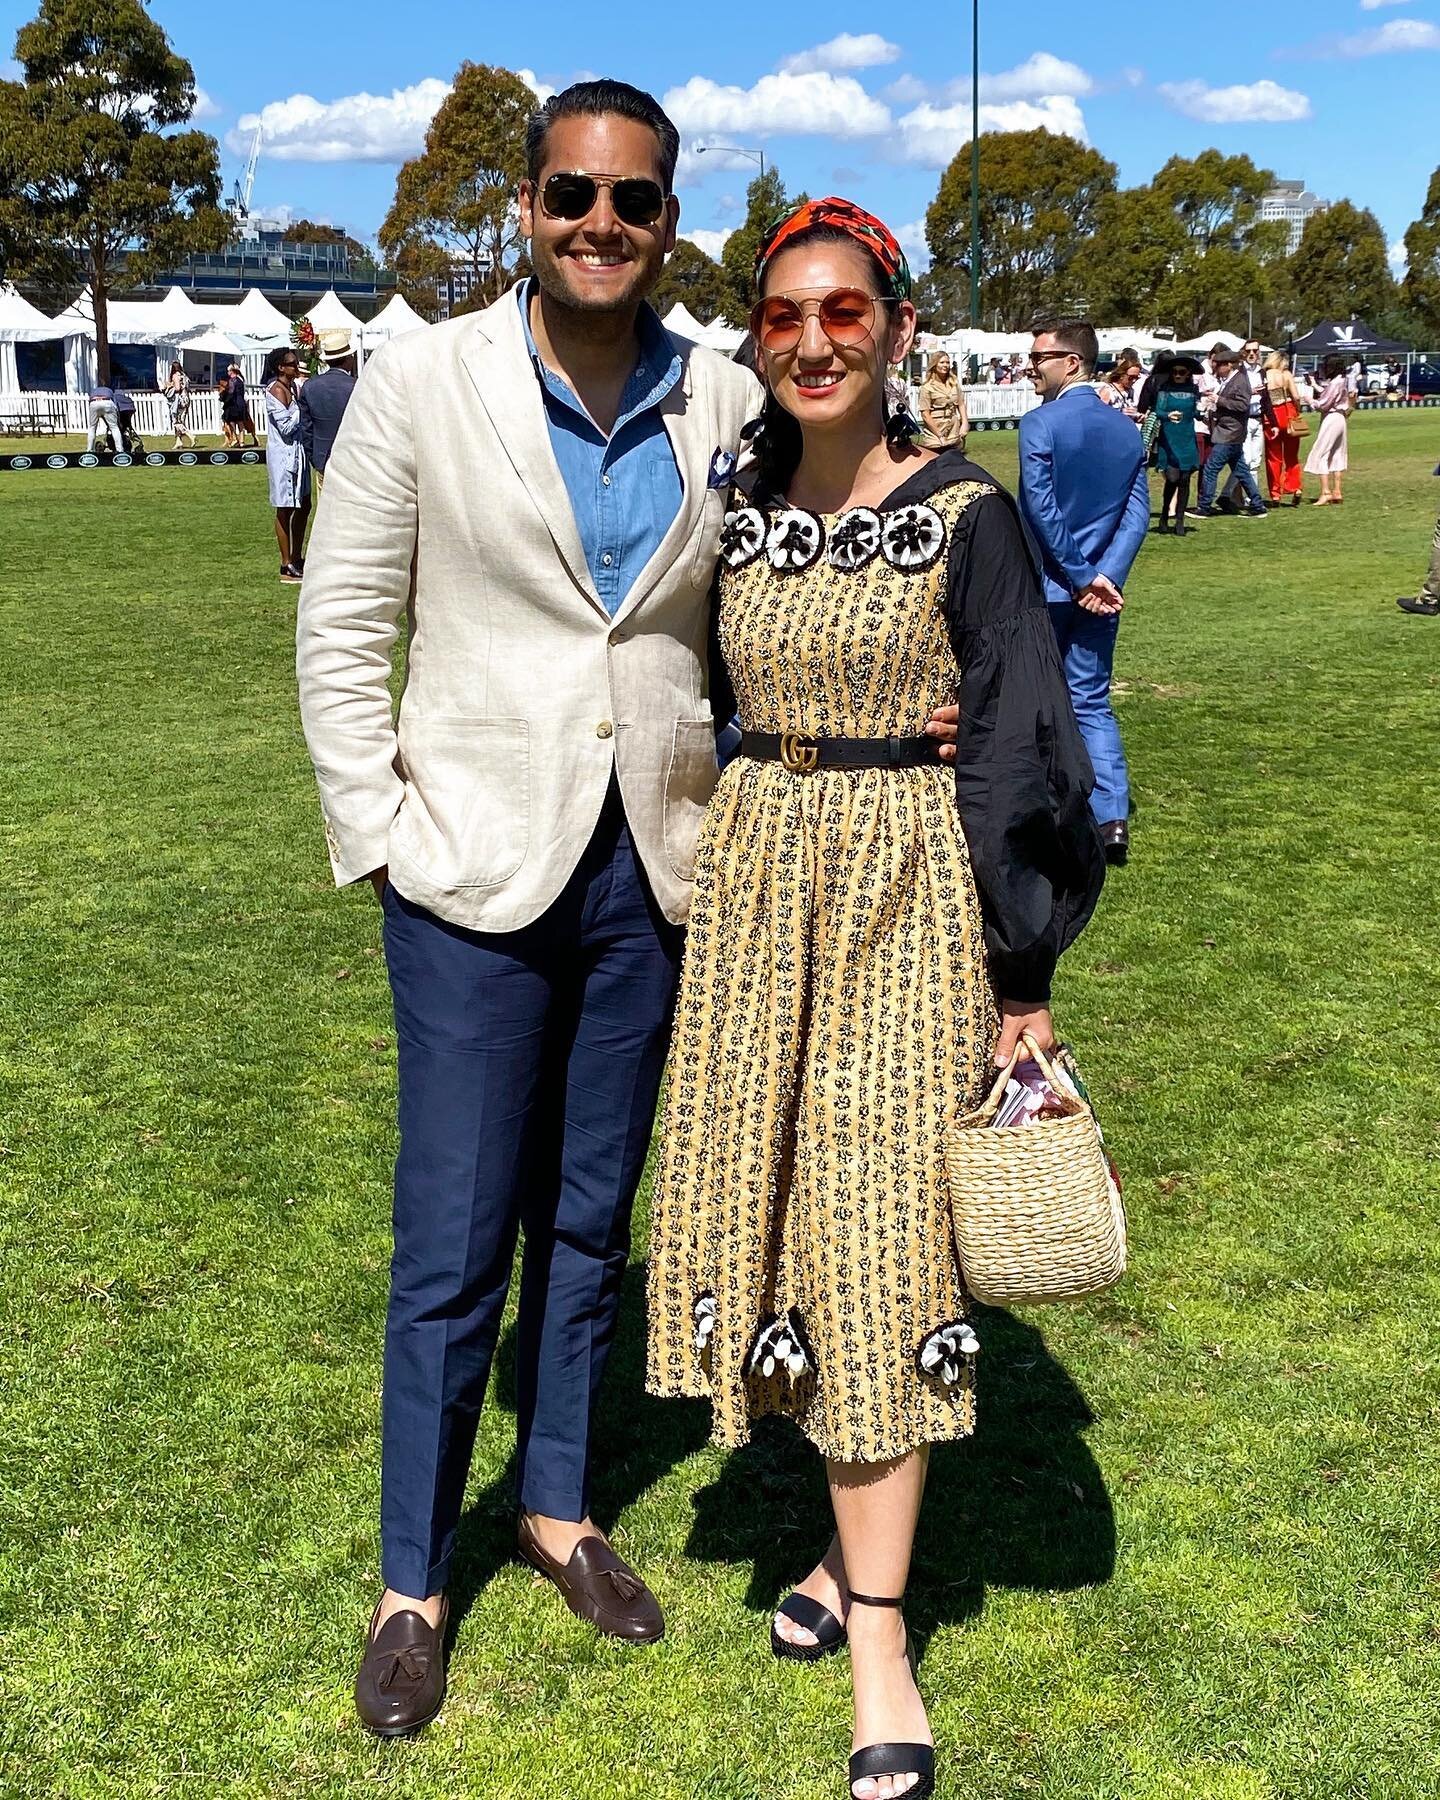 Lovely day at @polointhecity with my fave 💕 @psikari #polointhecity #polostyle #whattoweartothepolo #melbourne